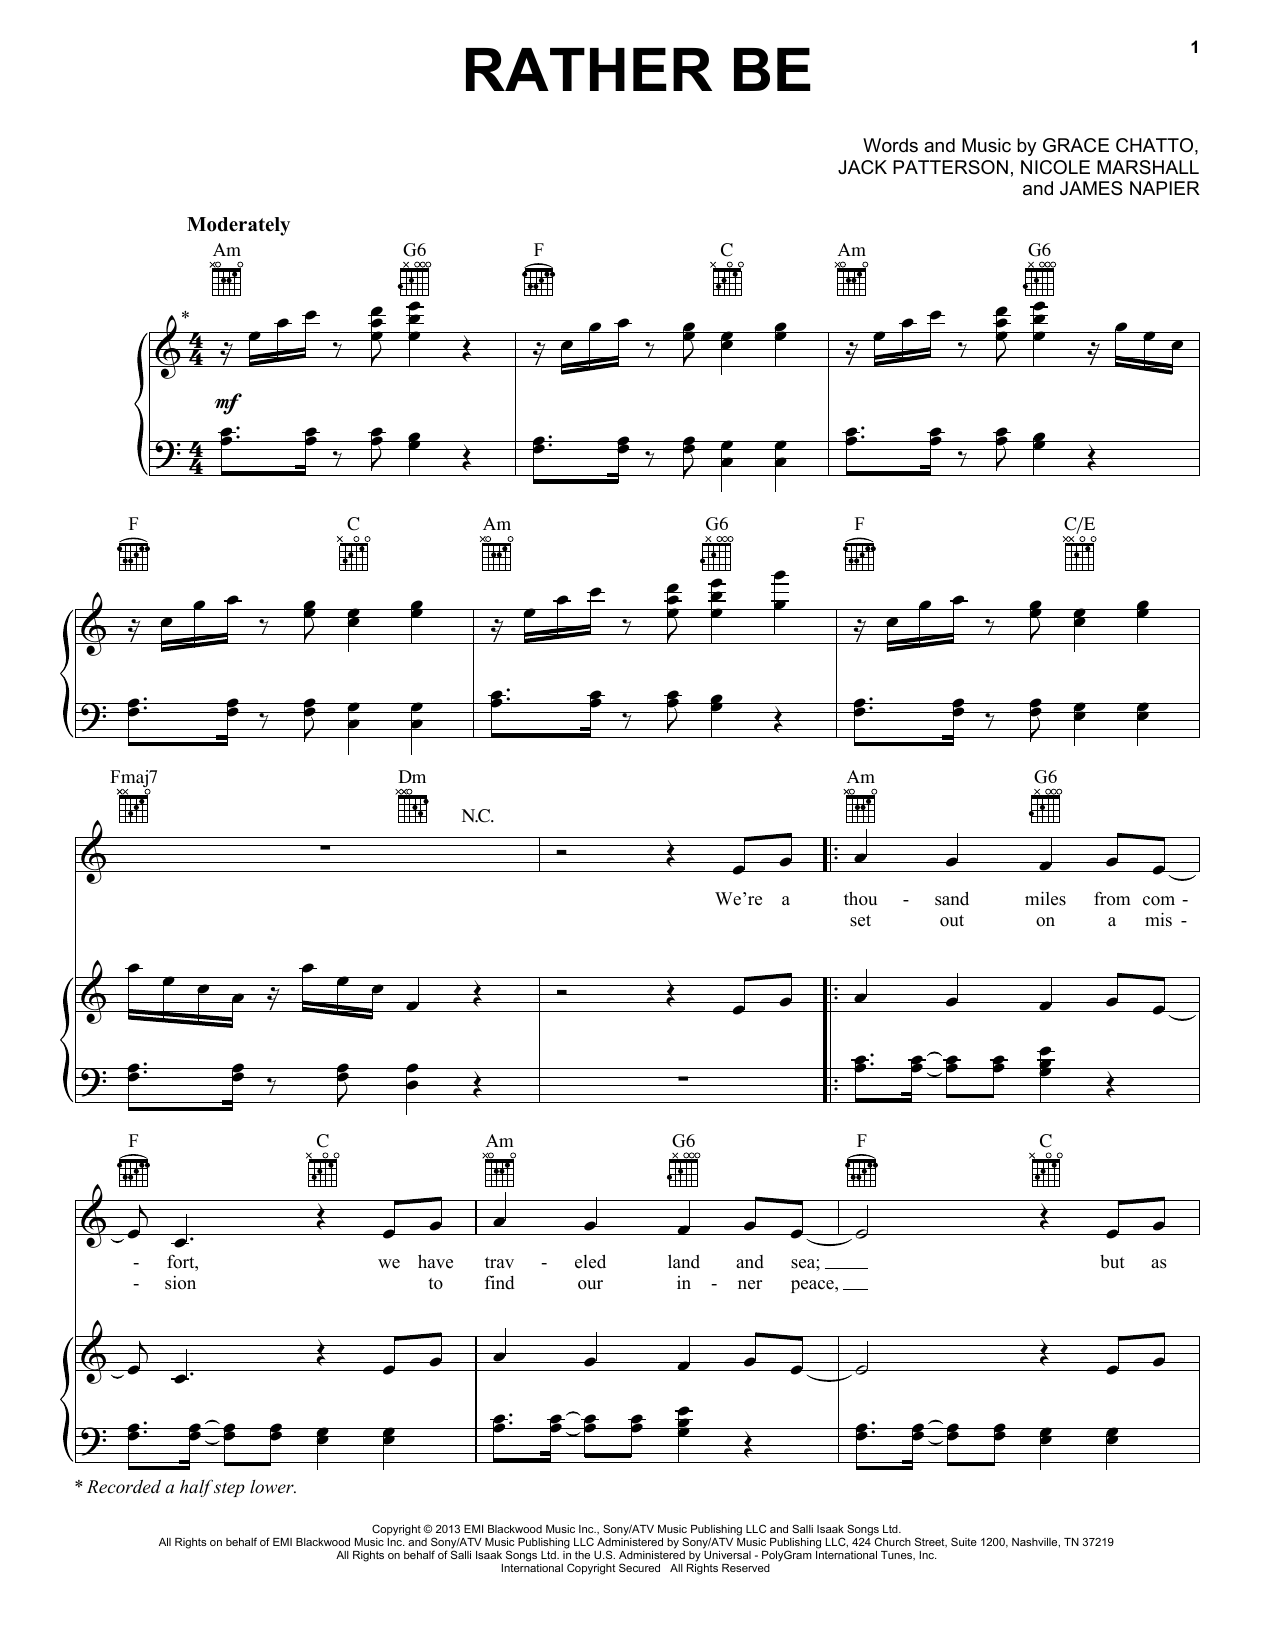 Download Clean Bandit feat. Jess Glynne Rather Be Sheet Music